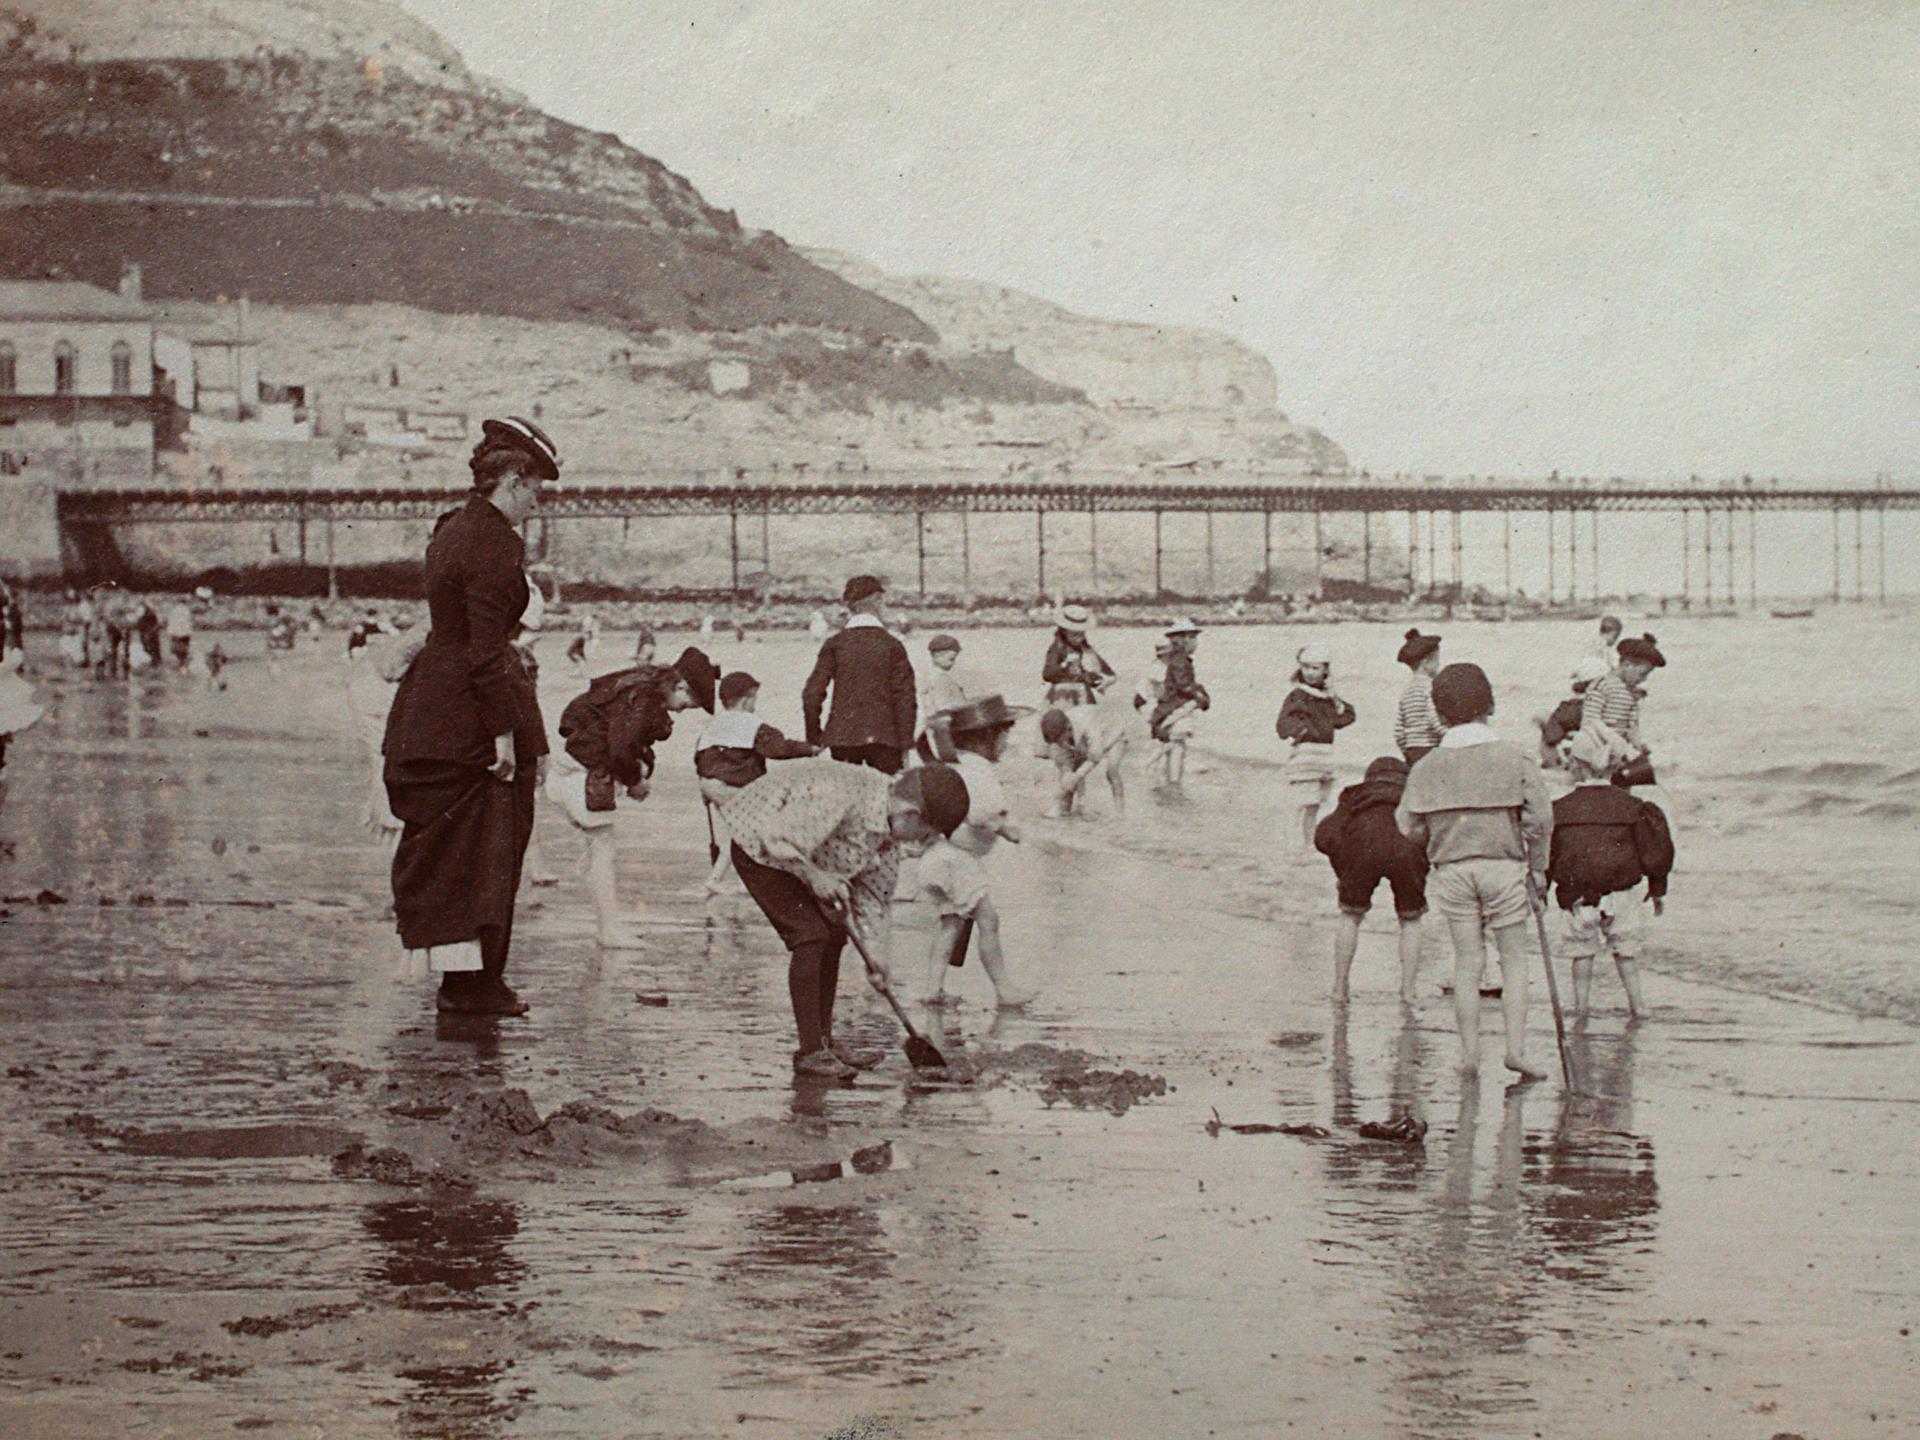 Victorian paddlers on the North shore